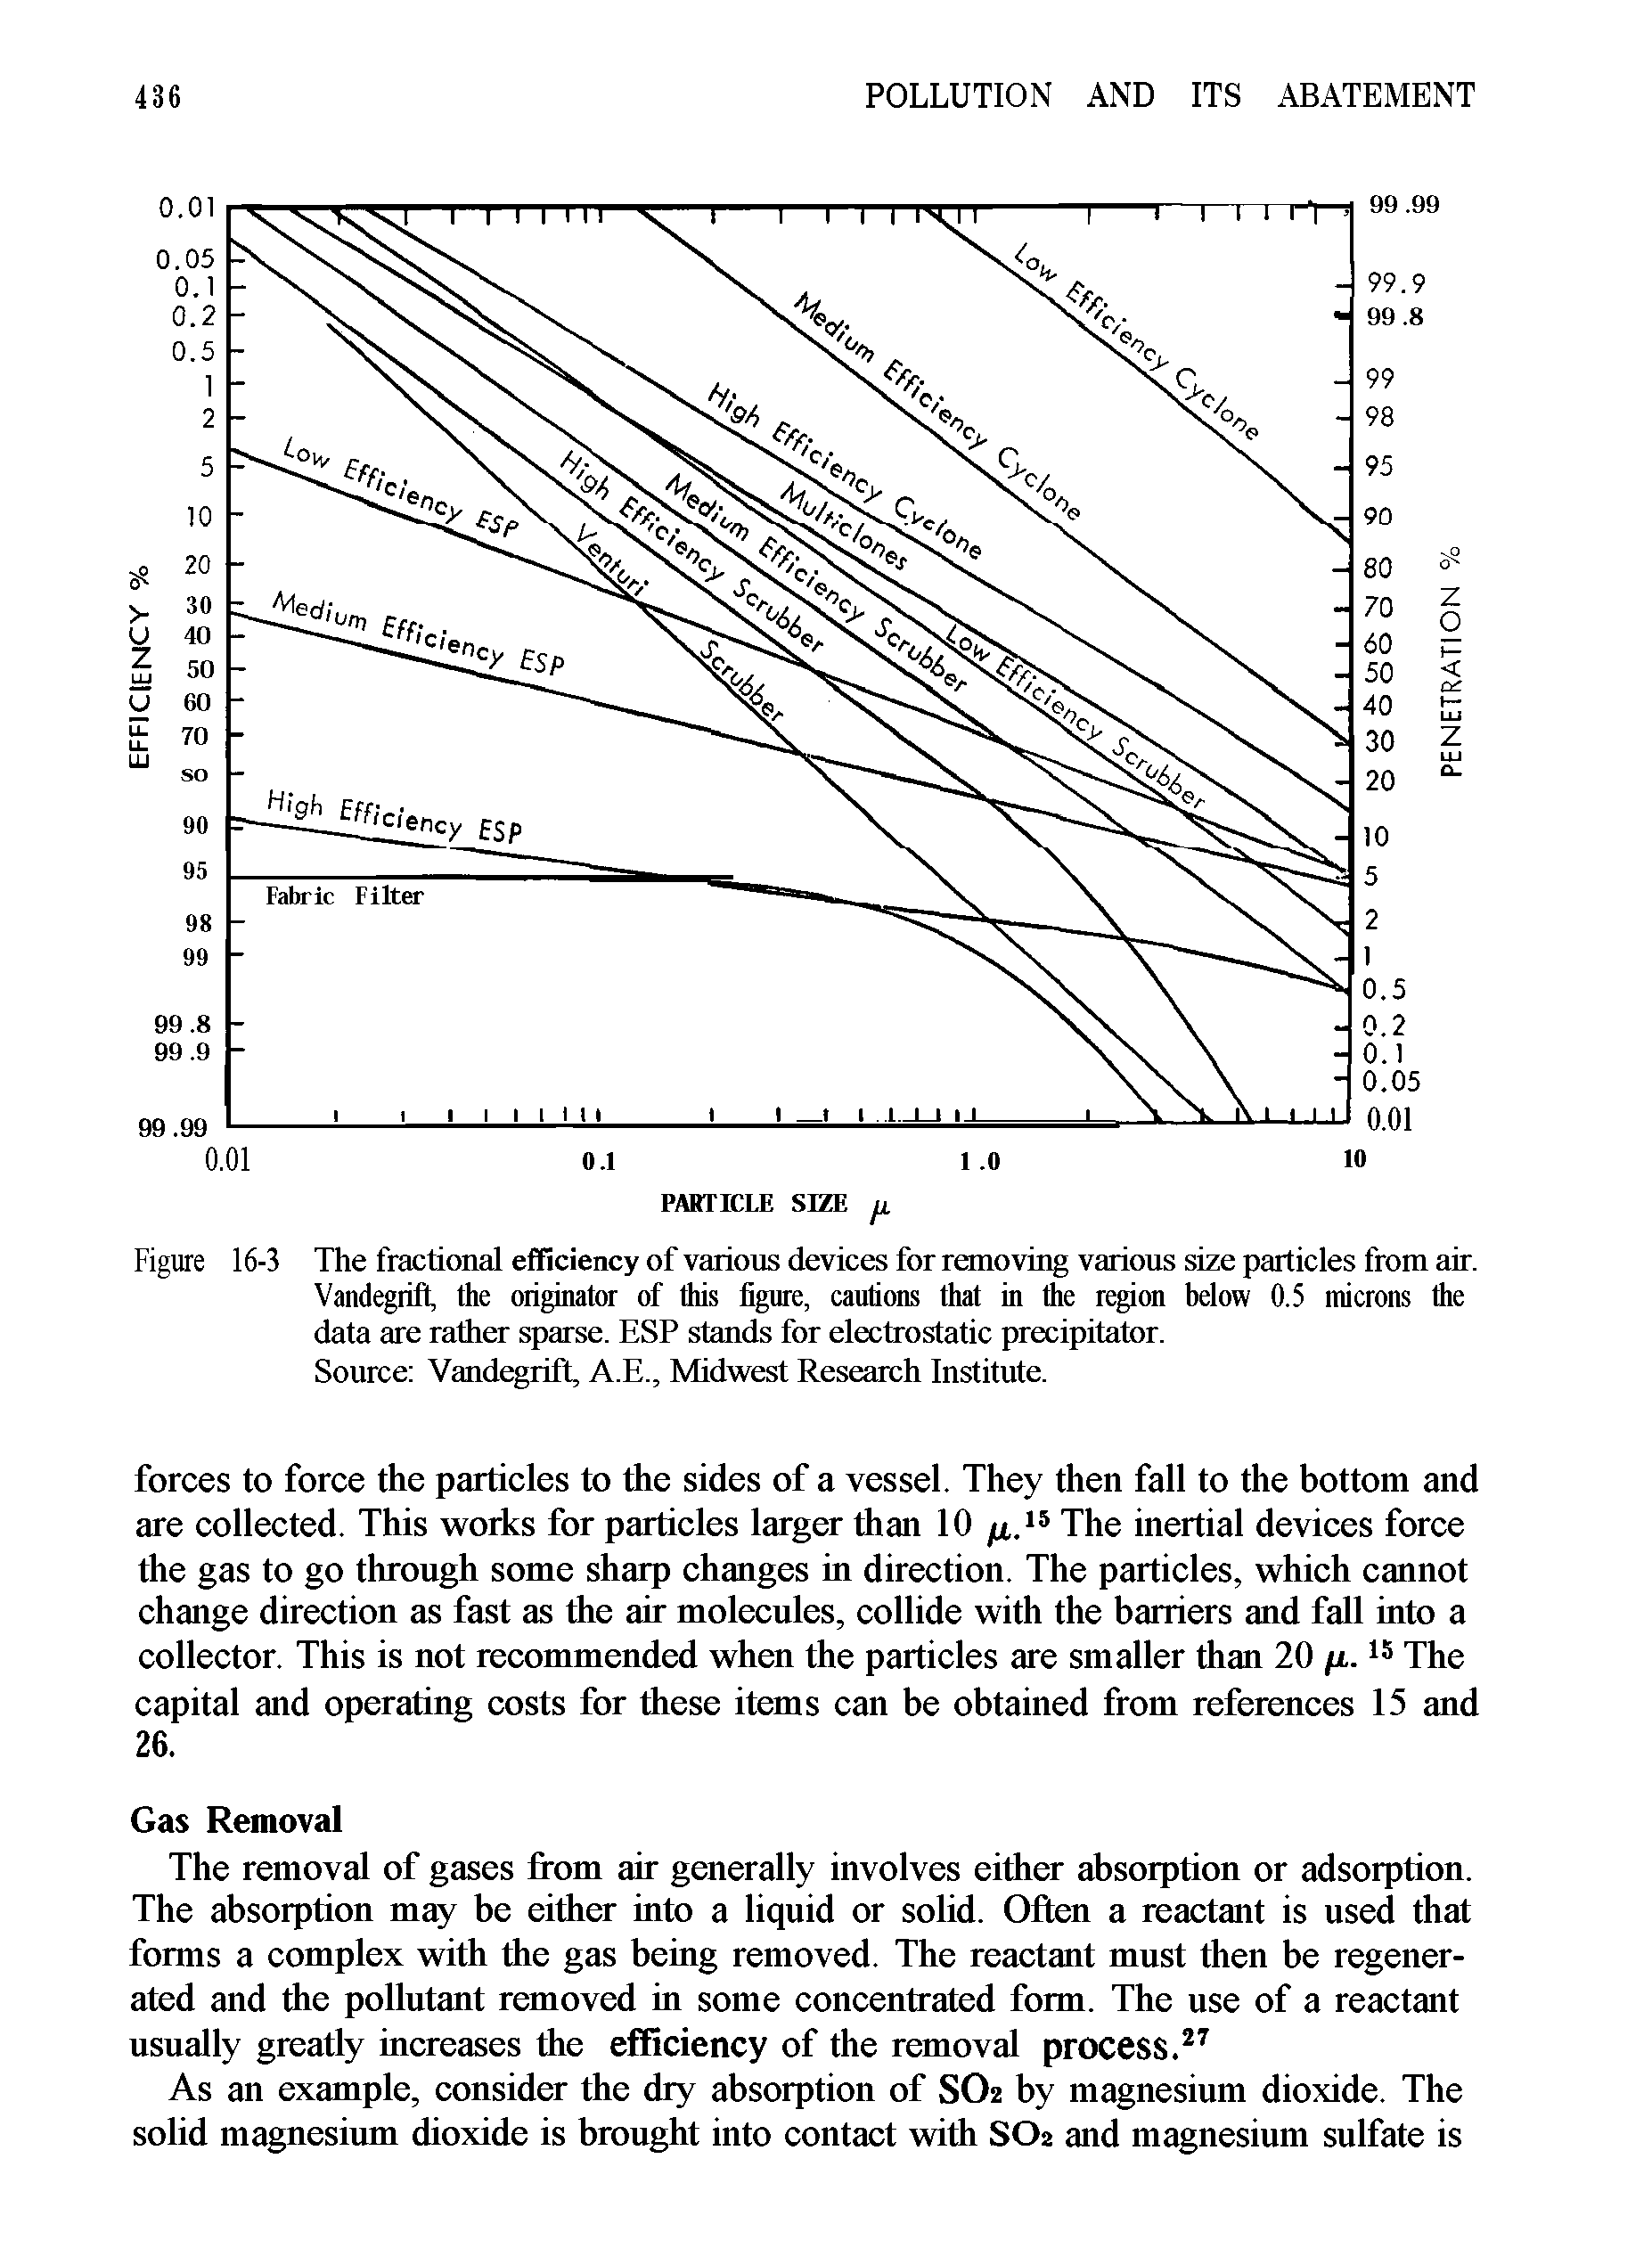 Figure 16-3 The fractional efficiency of various devices for removing various size particles from air.